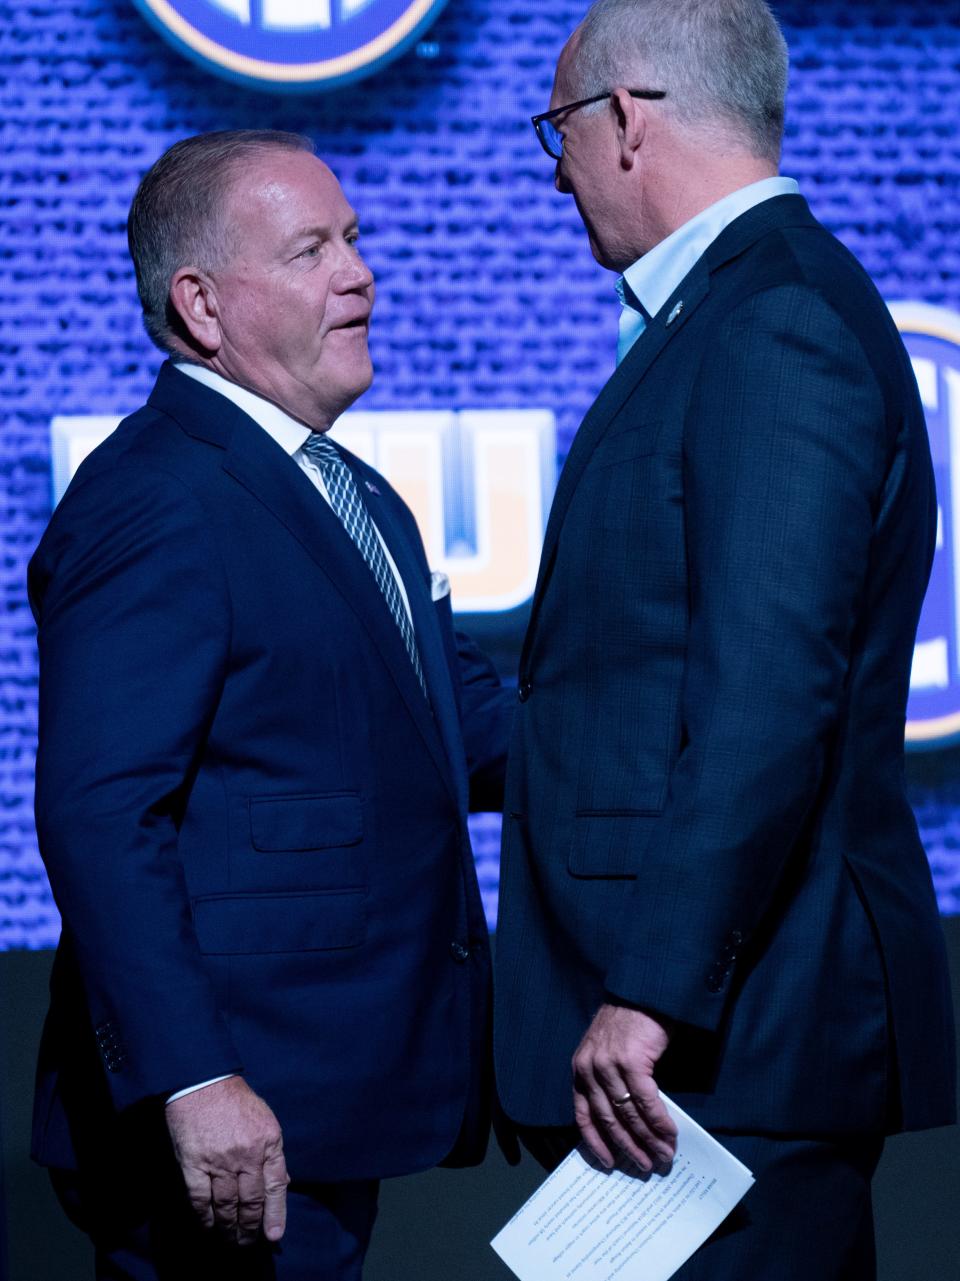 LSU football coach Brian Kelly, left, is greeted by SEC Commissioner Greg Sankey at SEC media days in Nashville, Tenn., on Monday. SEC officials announced that 2024 media days will be in Dallas next year, the first time the SEC will conduct its annual summer gathering in Texas.